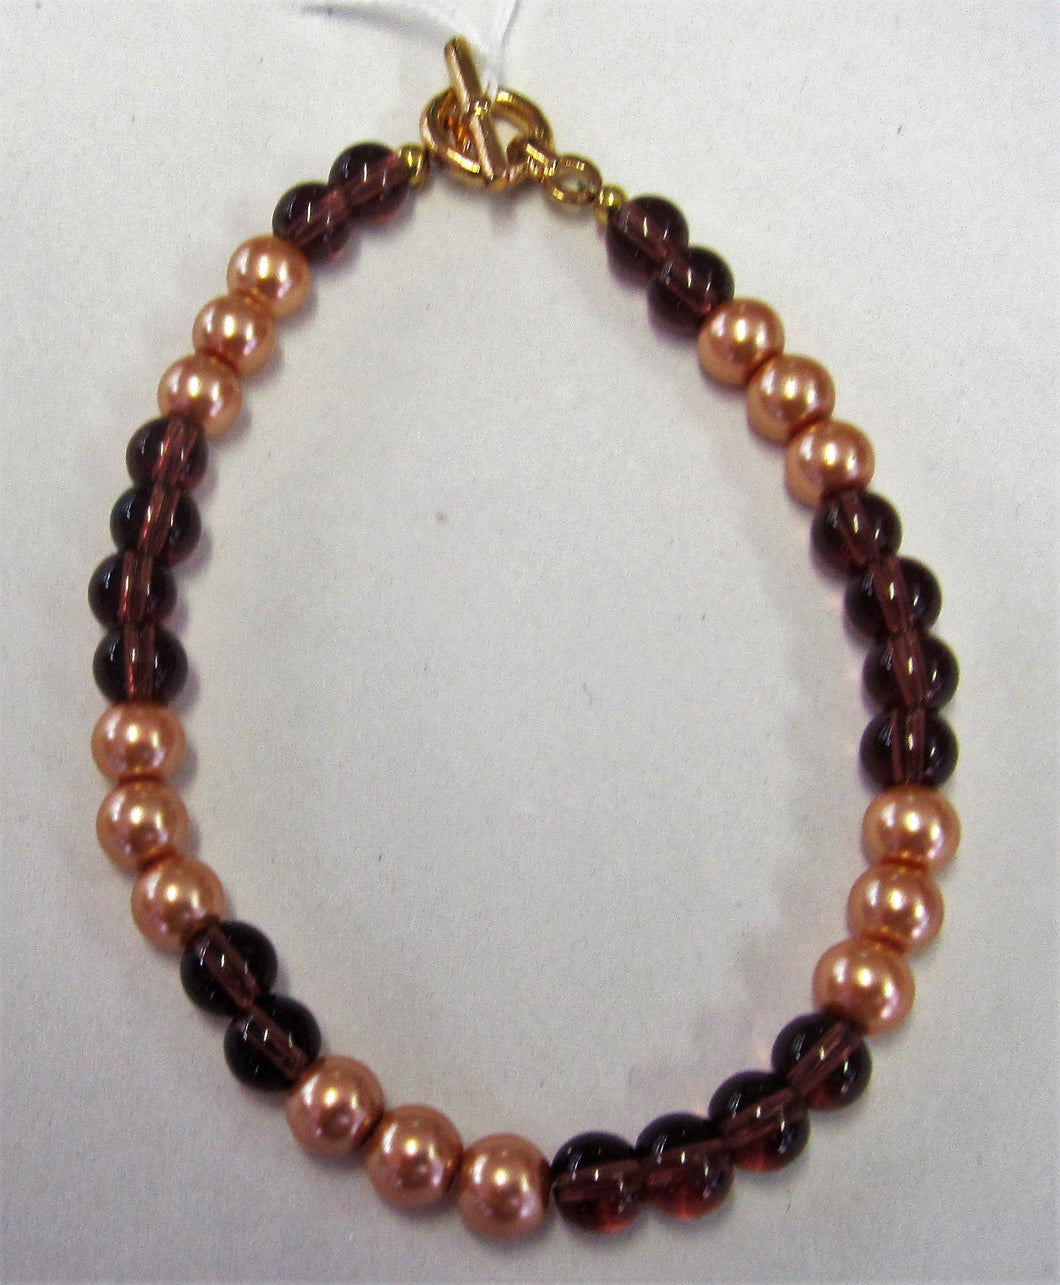 Beaded bracelet - Beautiful handcrafted with gold and brown beads